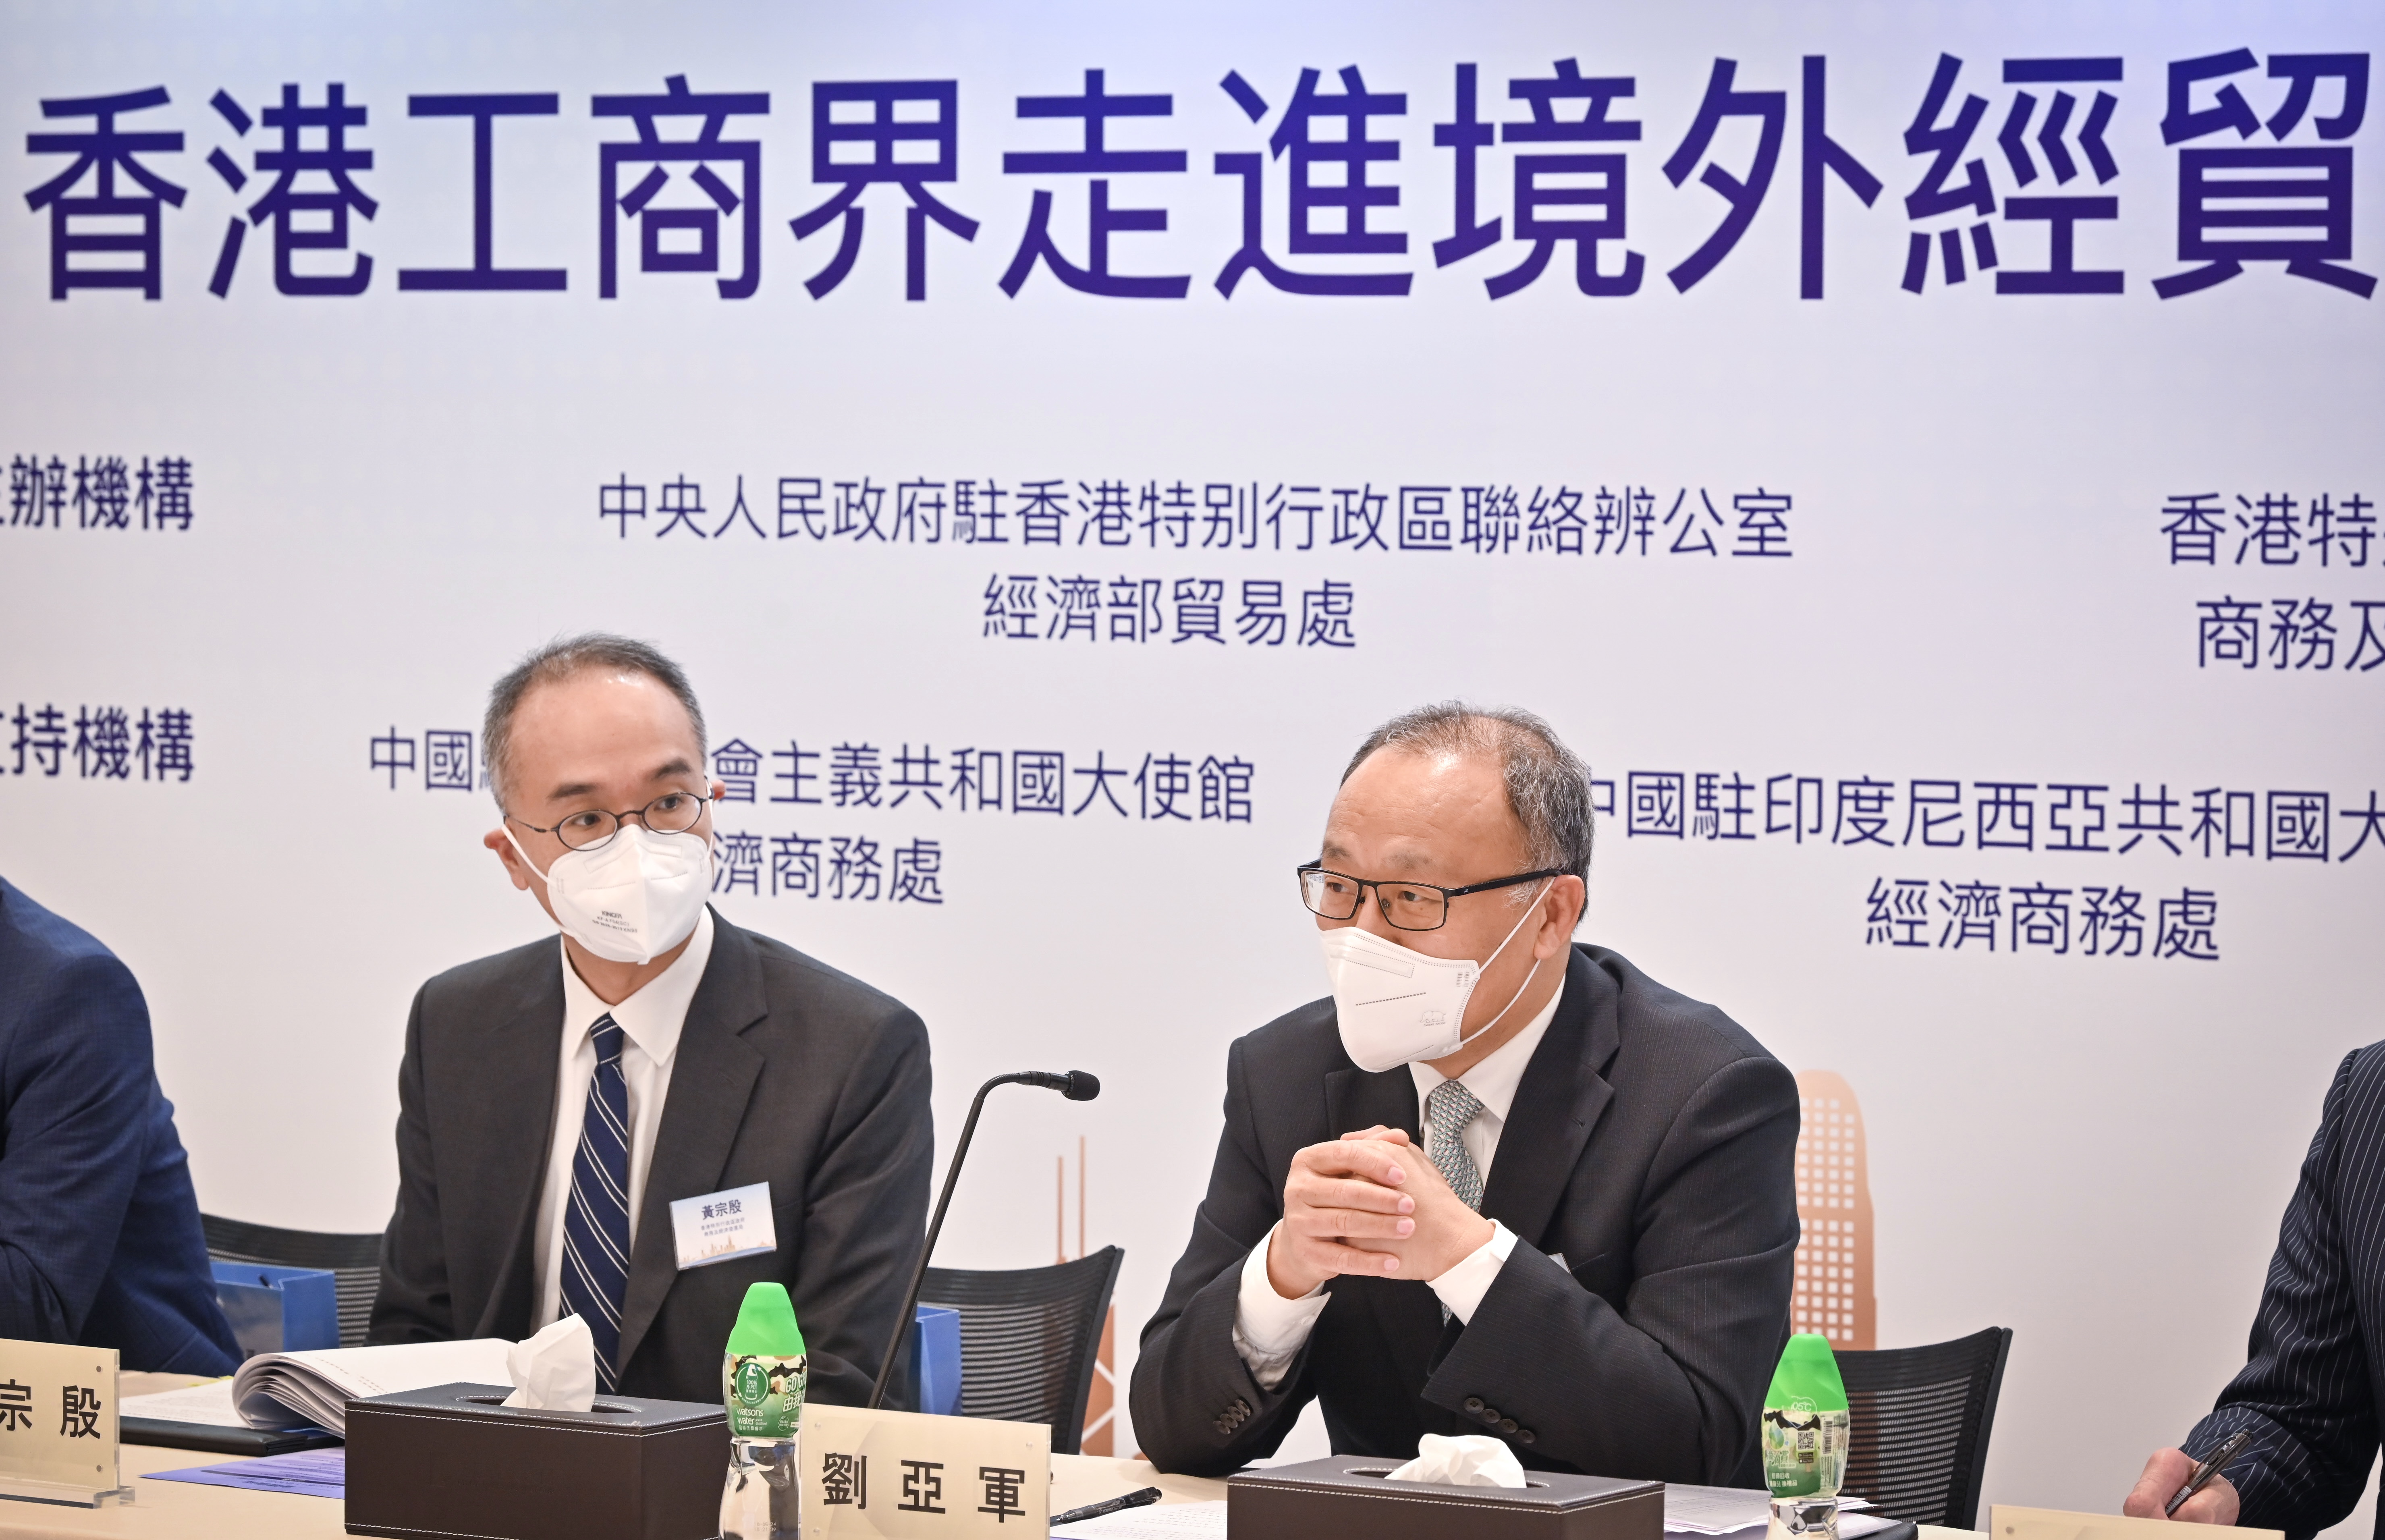 The Commerce and Economic Development Bureau and the Commercial Office of the Economic Affairs Department of the Liaison Office of the Central People＇s Government (LOCPG) in the Hong Kong Special Administrative Region (HKSAR) jointly organised a seminar on overseas Economic and Trade Co-operation Zones, with over 350 sign-ups from enterprises and different sectors on 30 November 2022. Photo shows the Deputy Director-General of the Economic Affairs Department and Head of the Commercial Office of the LOCPG in the HKSAR, Mr Liu Yajun (right), speaking at the event. Looking on is the Acting Commissioner for Belt and Road, Mr Johann Wong (left).